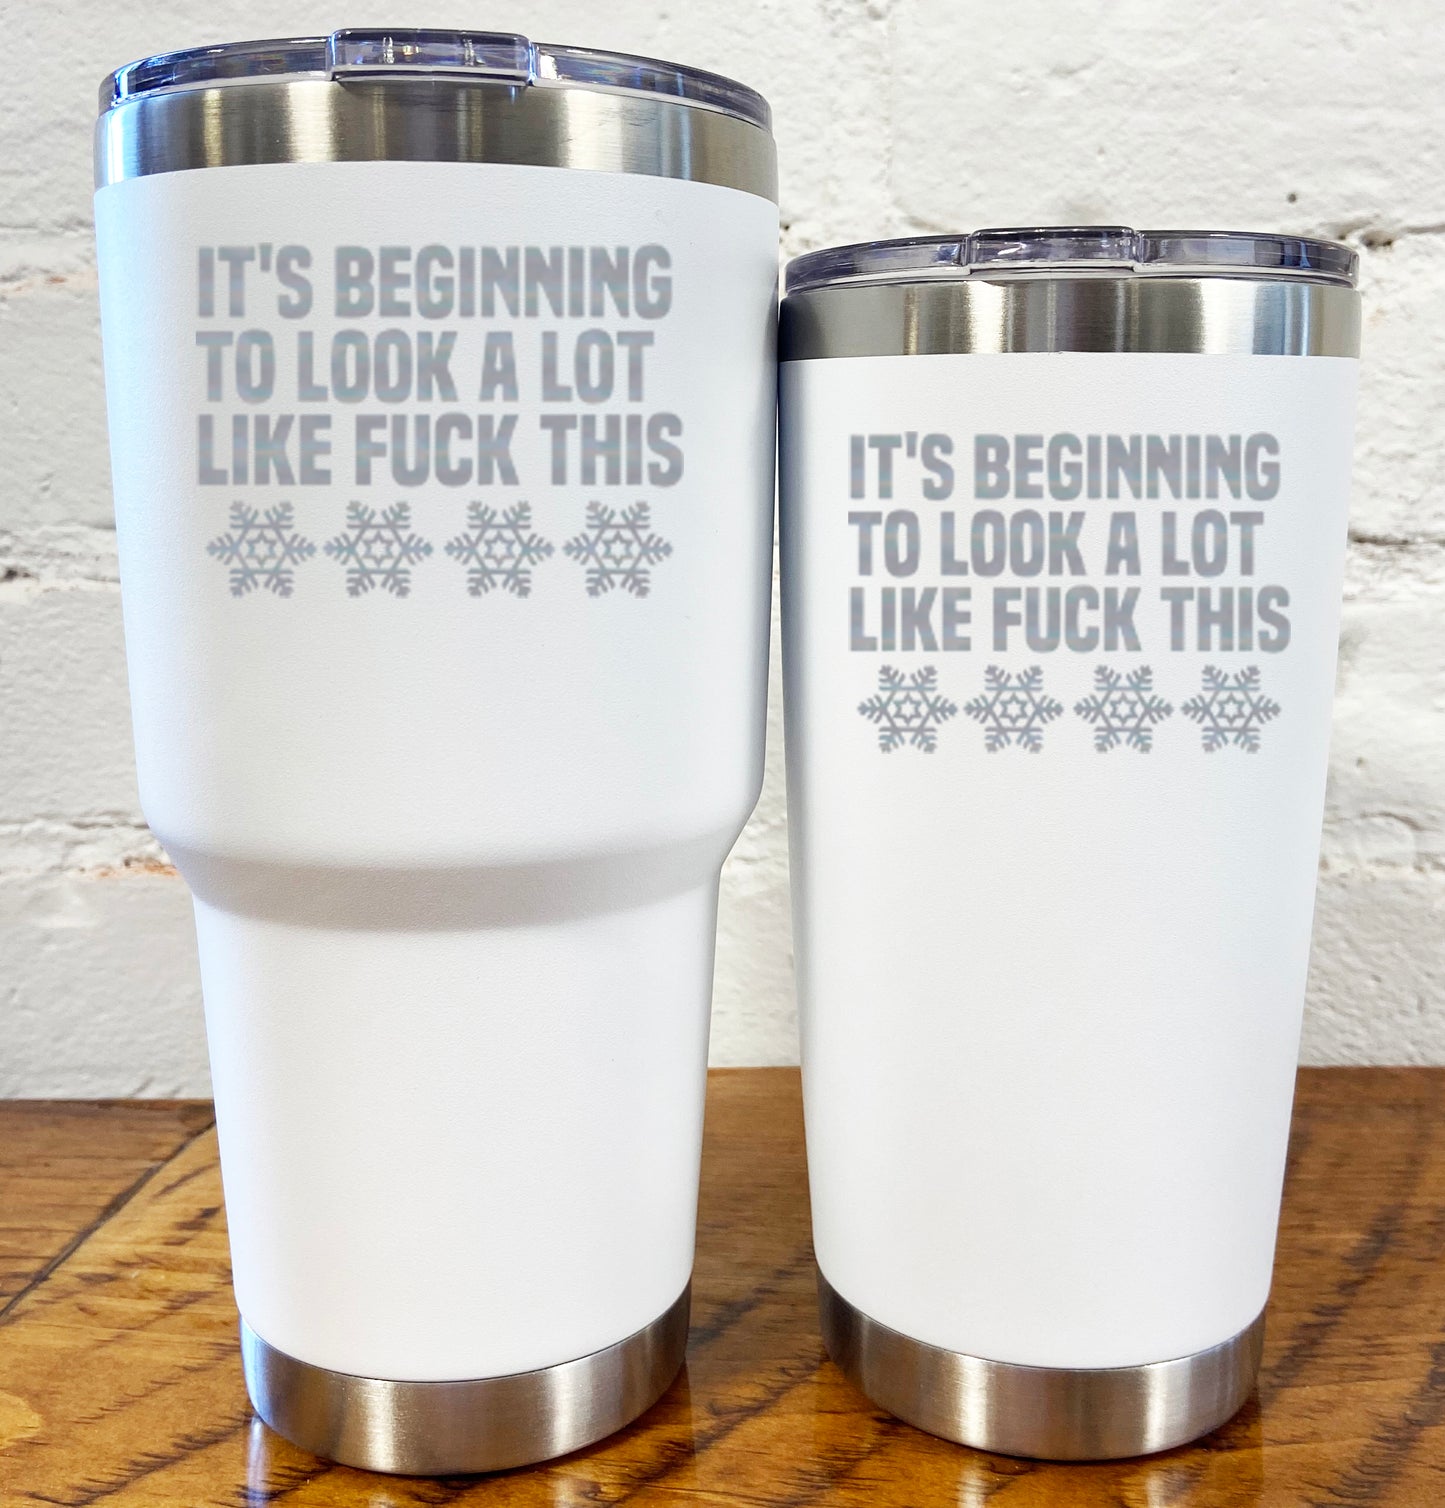 30oz and 20oz white tumblers with silver saying "it's beginning to look a lot like fuck this" with snowflakes underneath